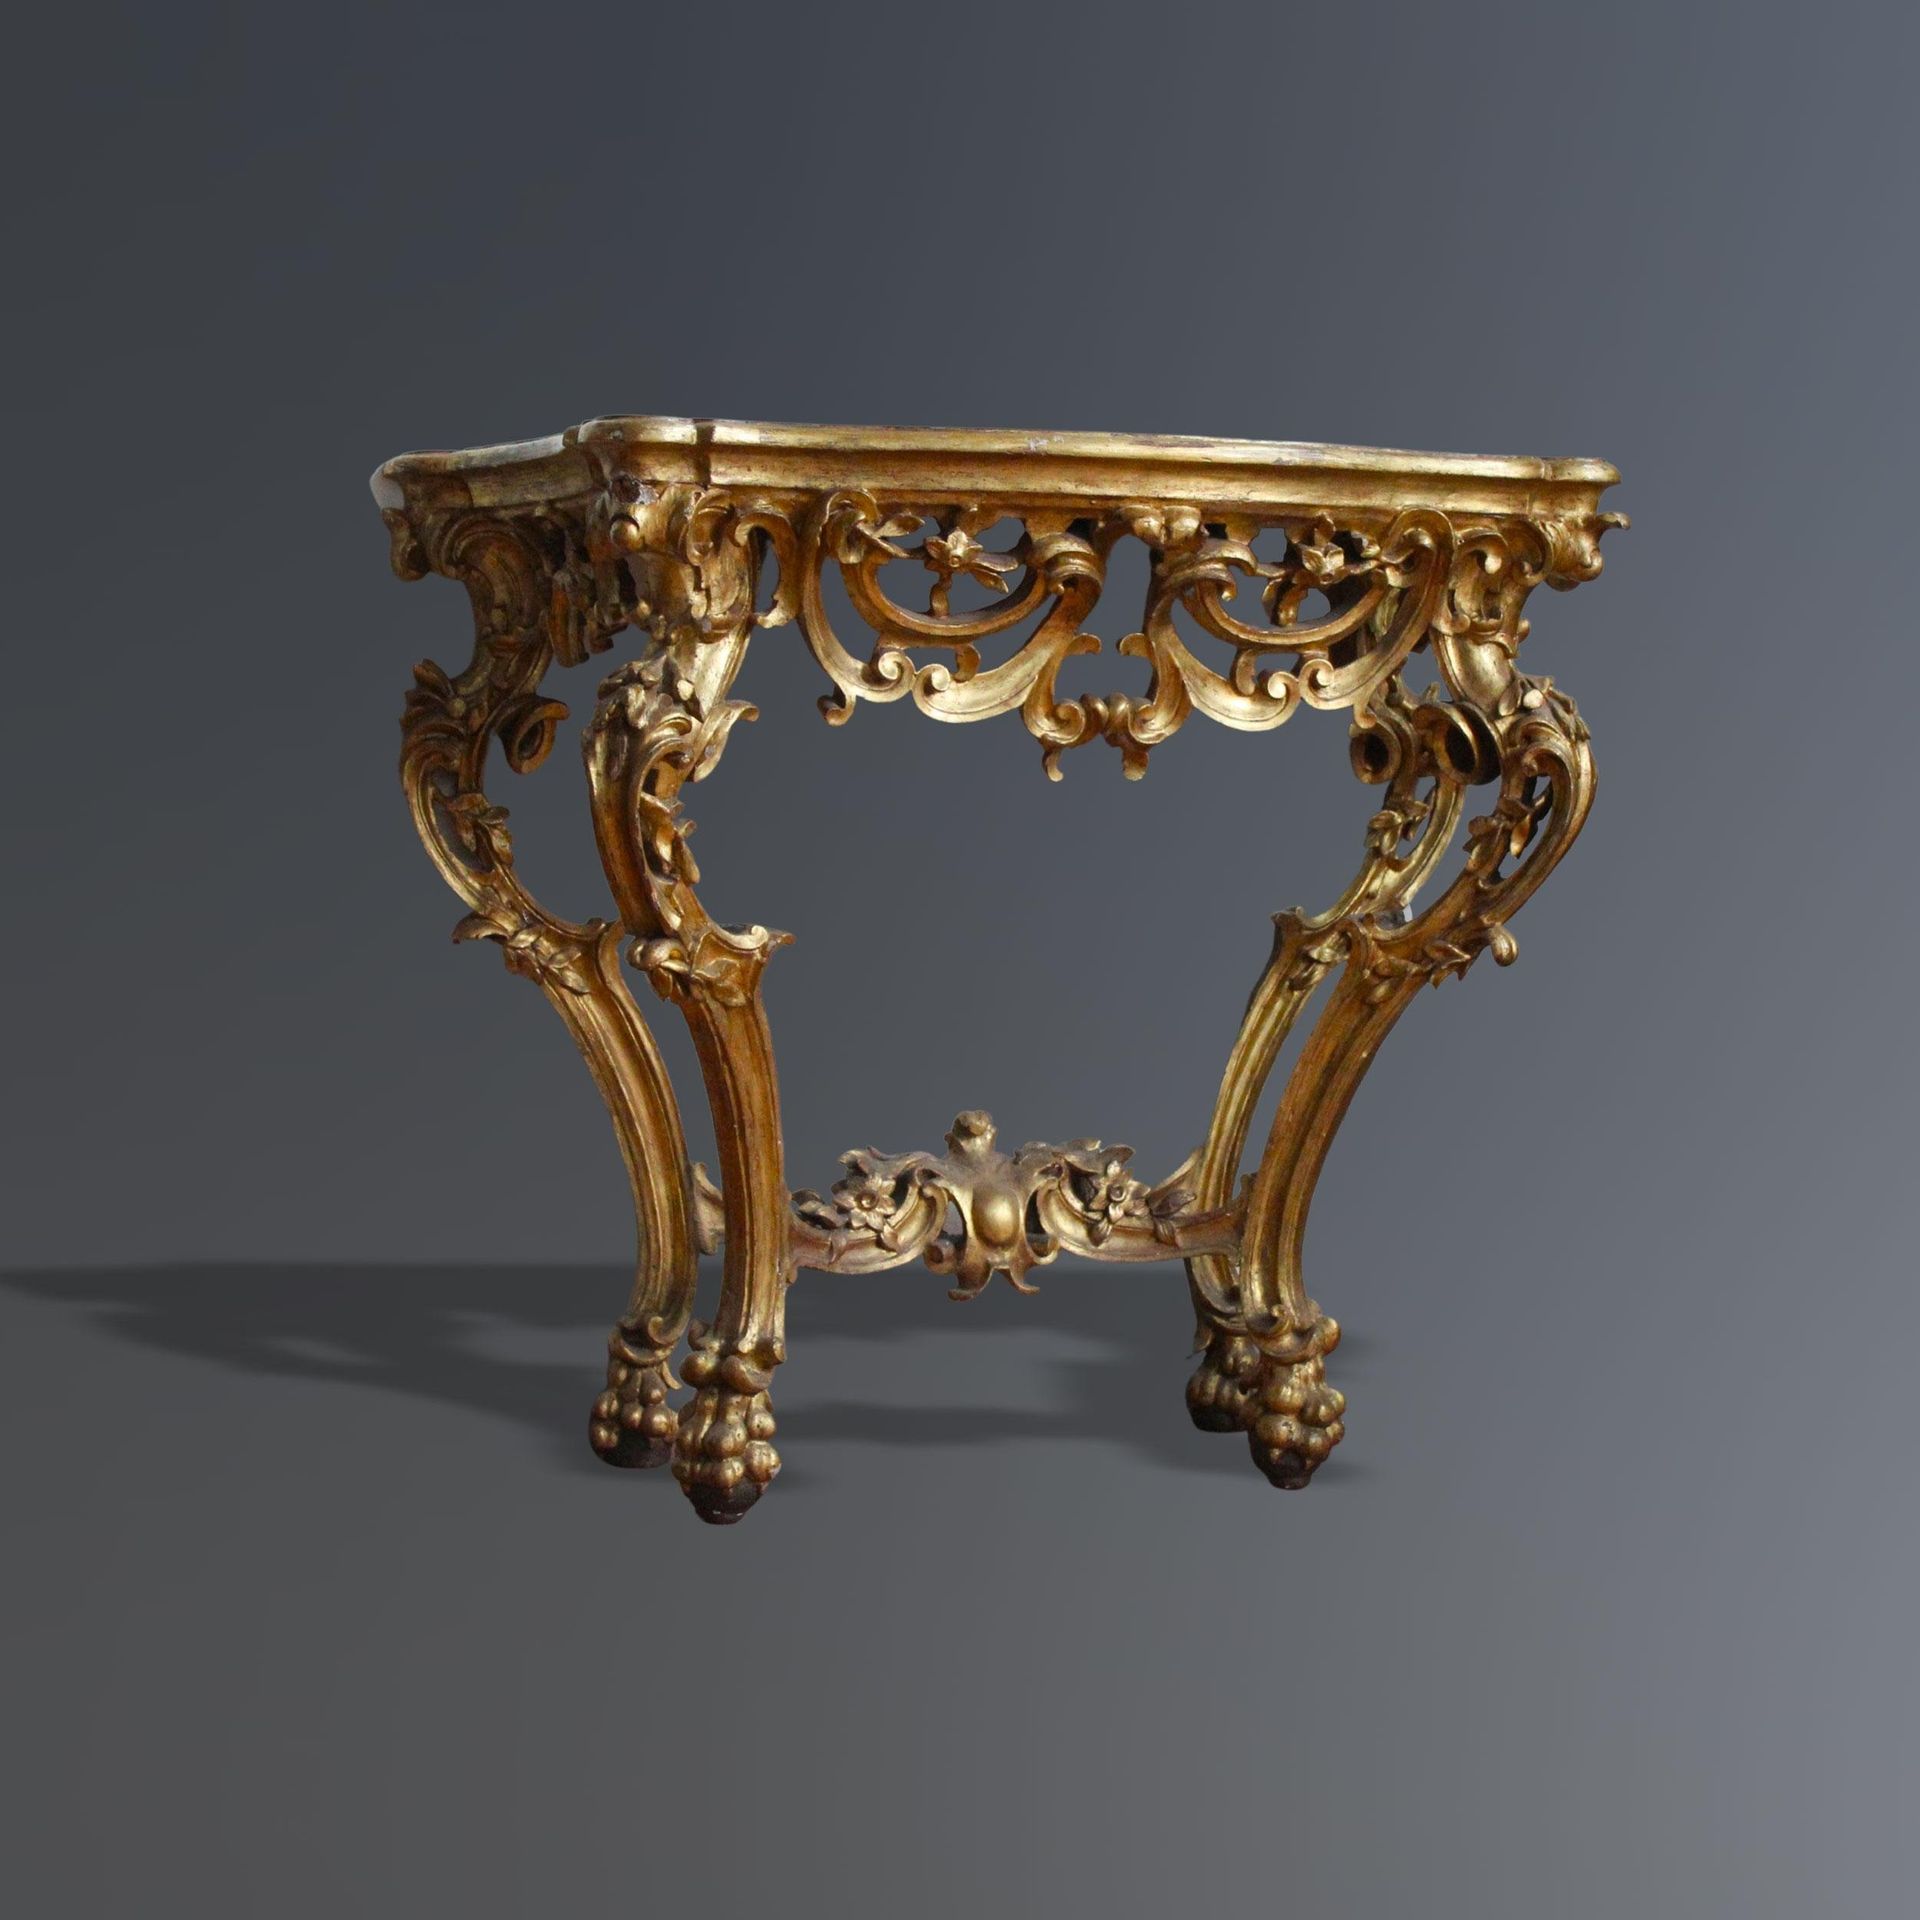 Null Gilded Console - 103x117x56cm, 19th century